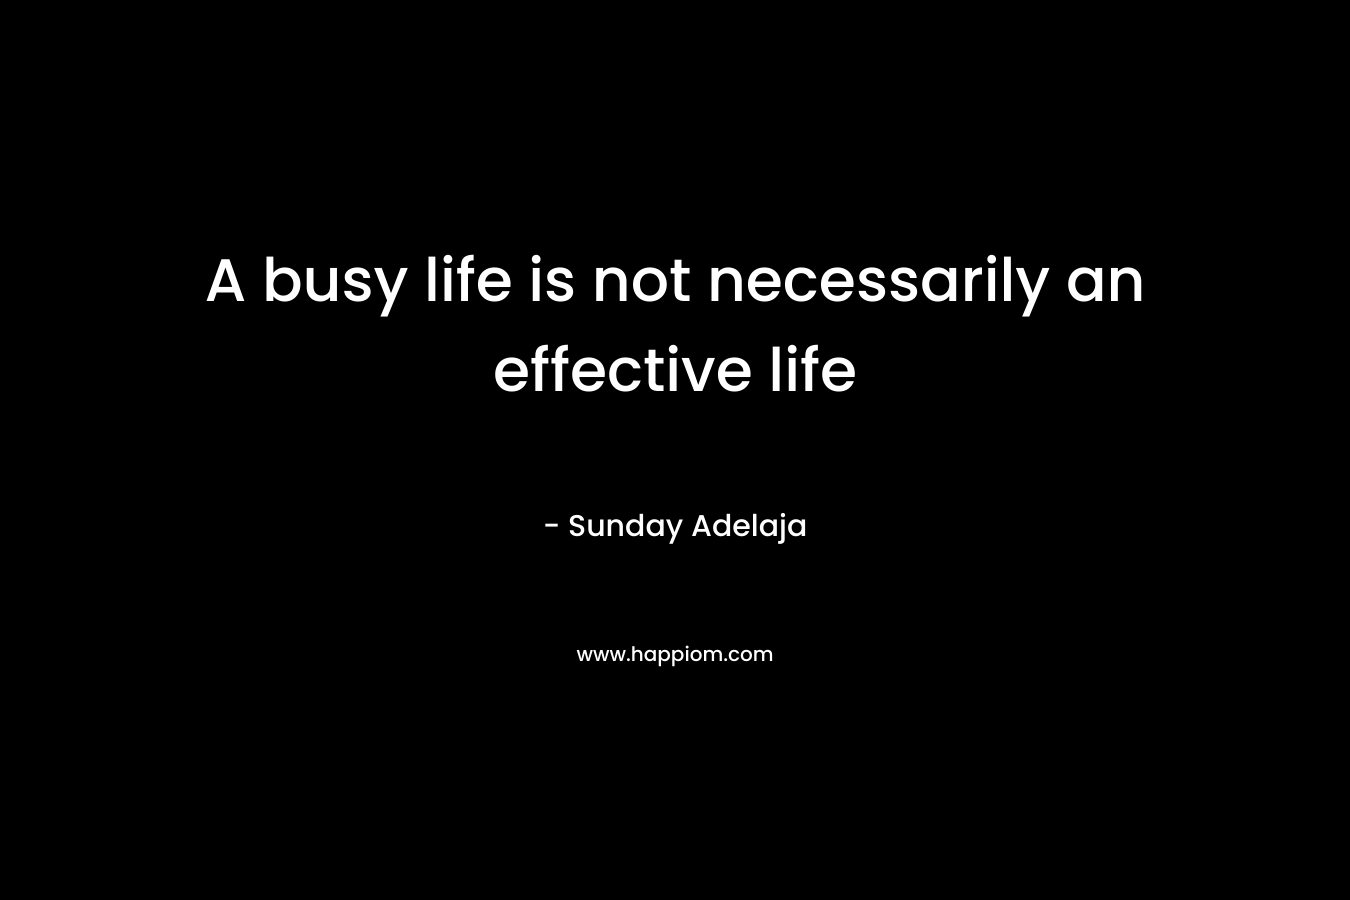 A busy life is not necessarily an effective life